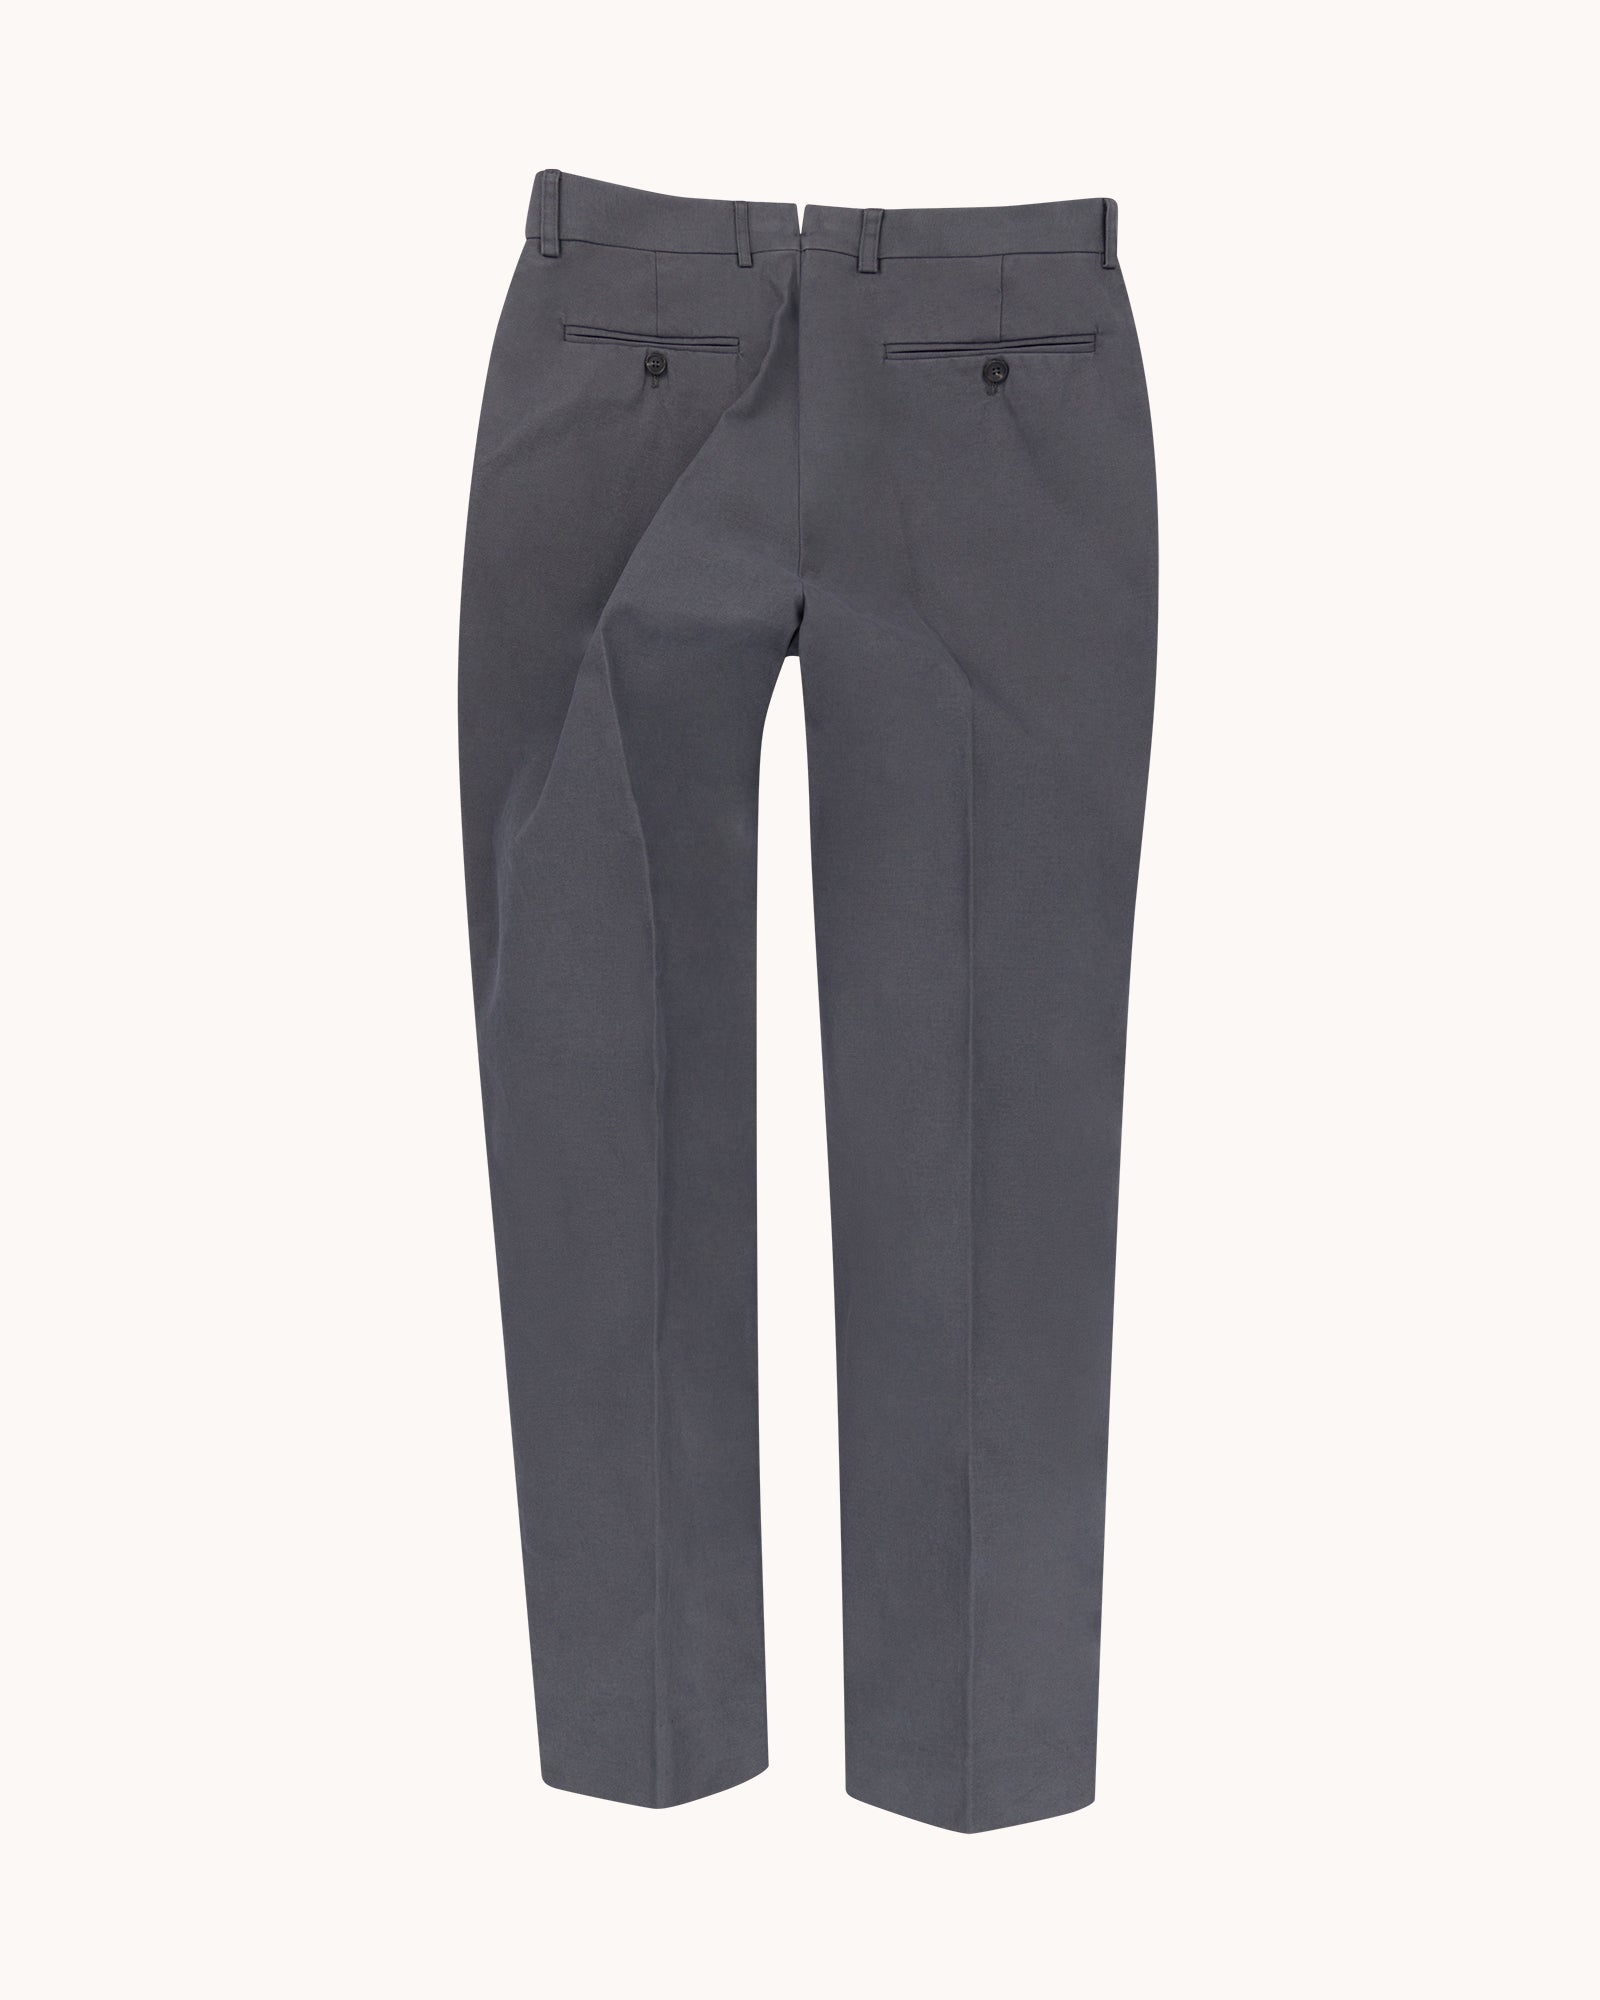 Garment Washed Flat Front Trouser - Grey Cotton Canvas